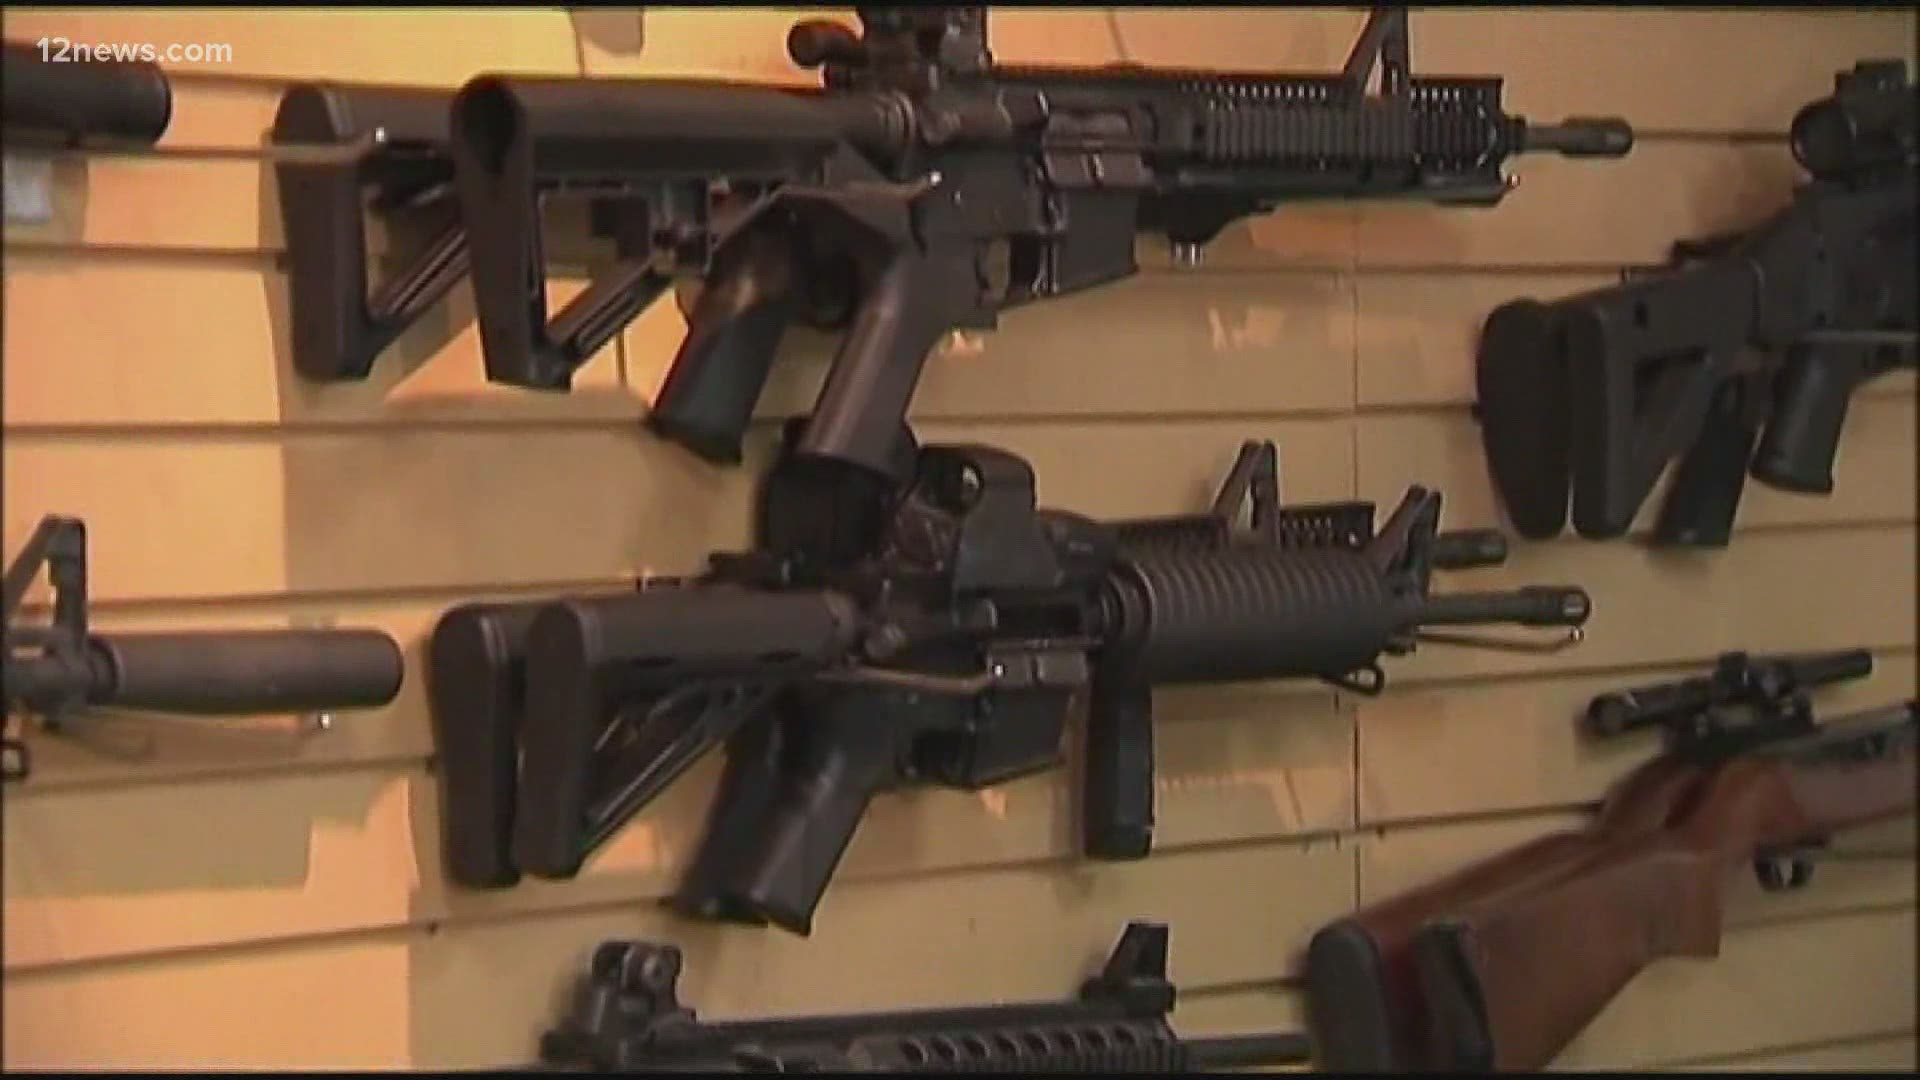 A bill making its way through the Arizona legislature would allow people to have loaded guns in the vehicles on school grounds.